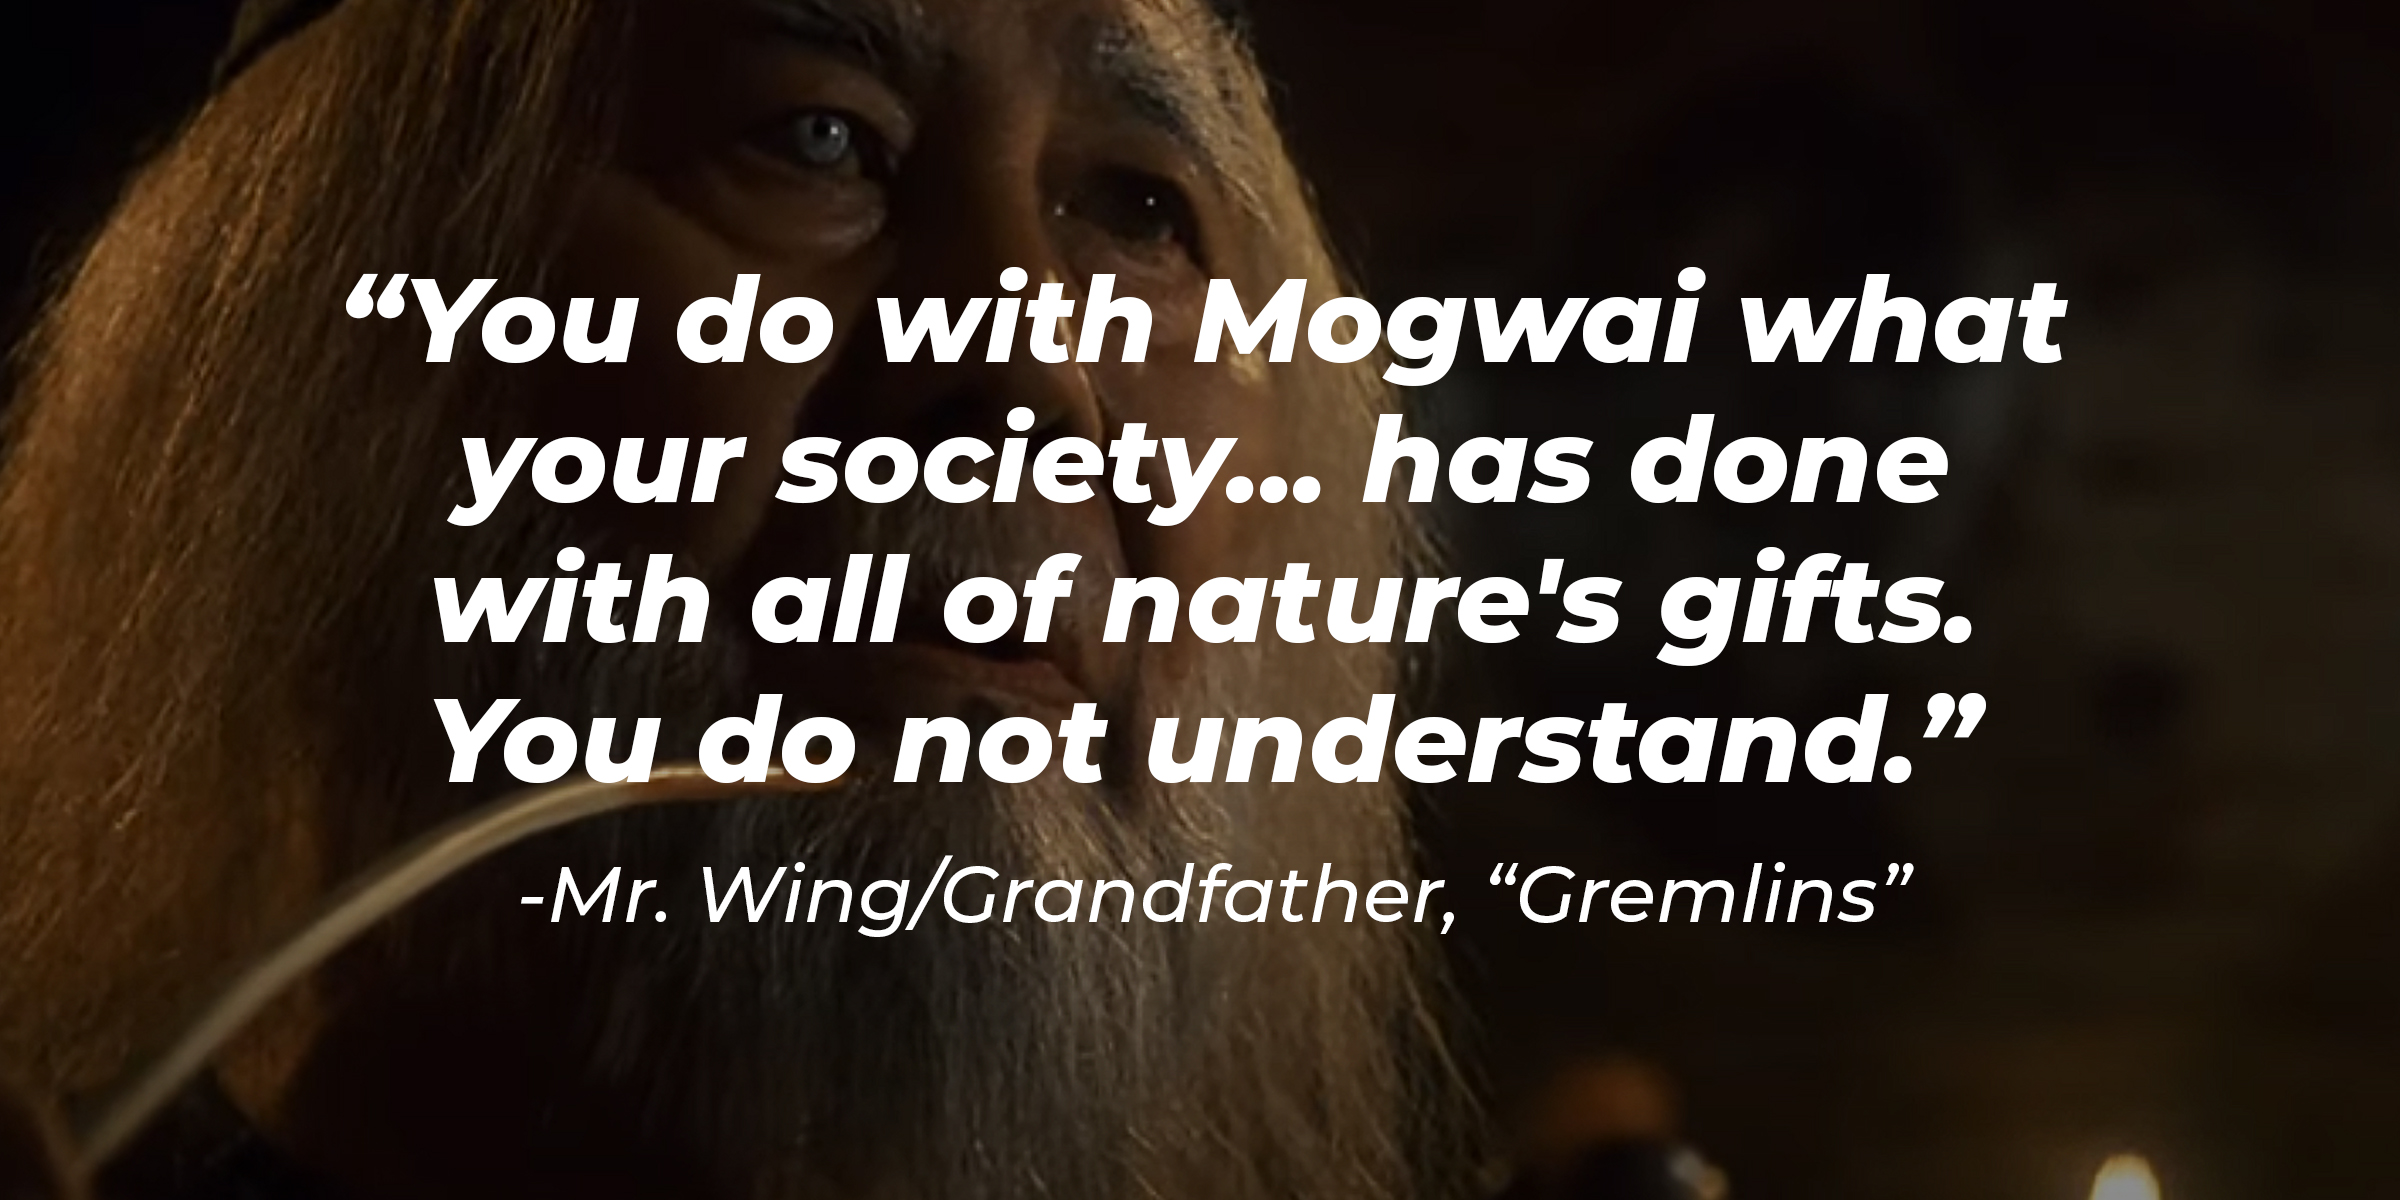 An image of Mr. Wing/Grandfather with his quote: "You do with Mogwai what your society... has done with all of nature's gifts. You do not understand." | Source: Youtube.com/warnerbrosentertainment